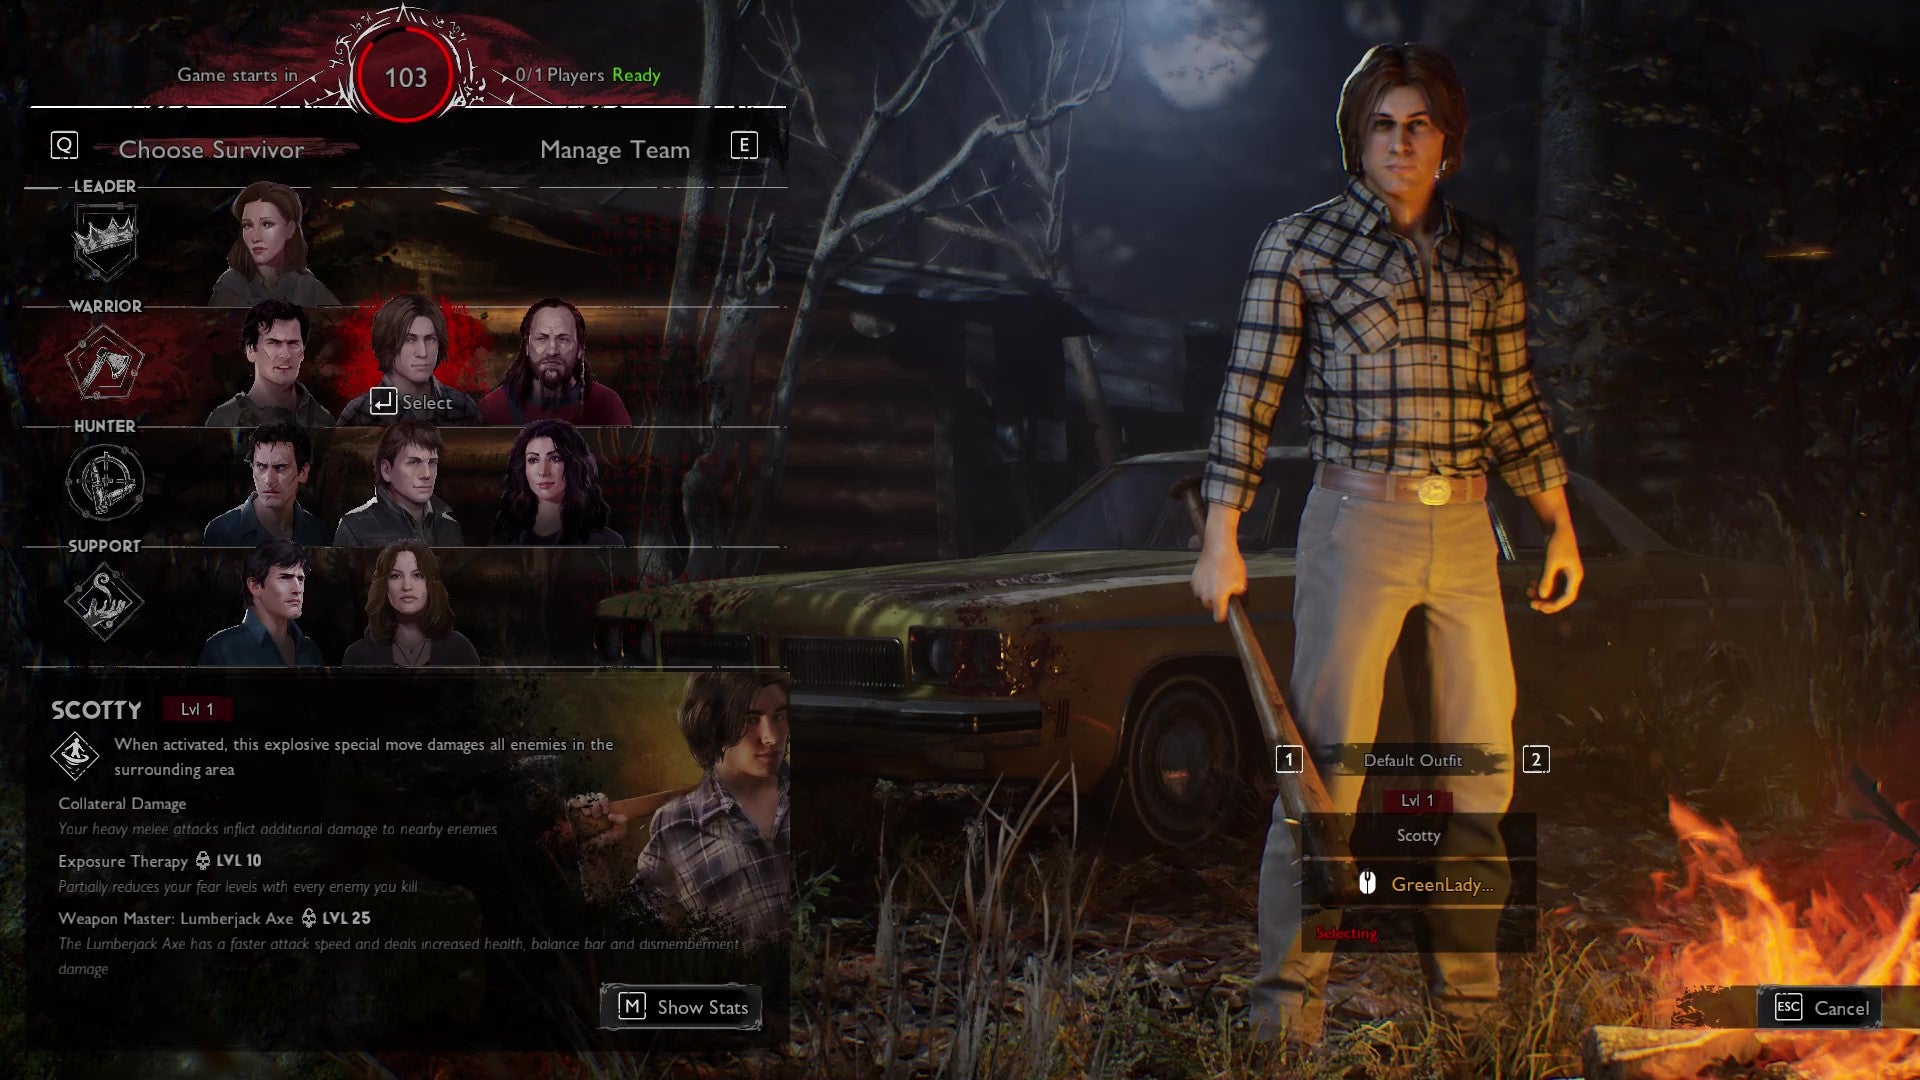 The player selection screen from Evil Dead: The Game, with Scotty selected by a Survivor player.